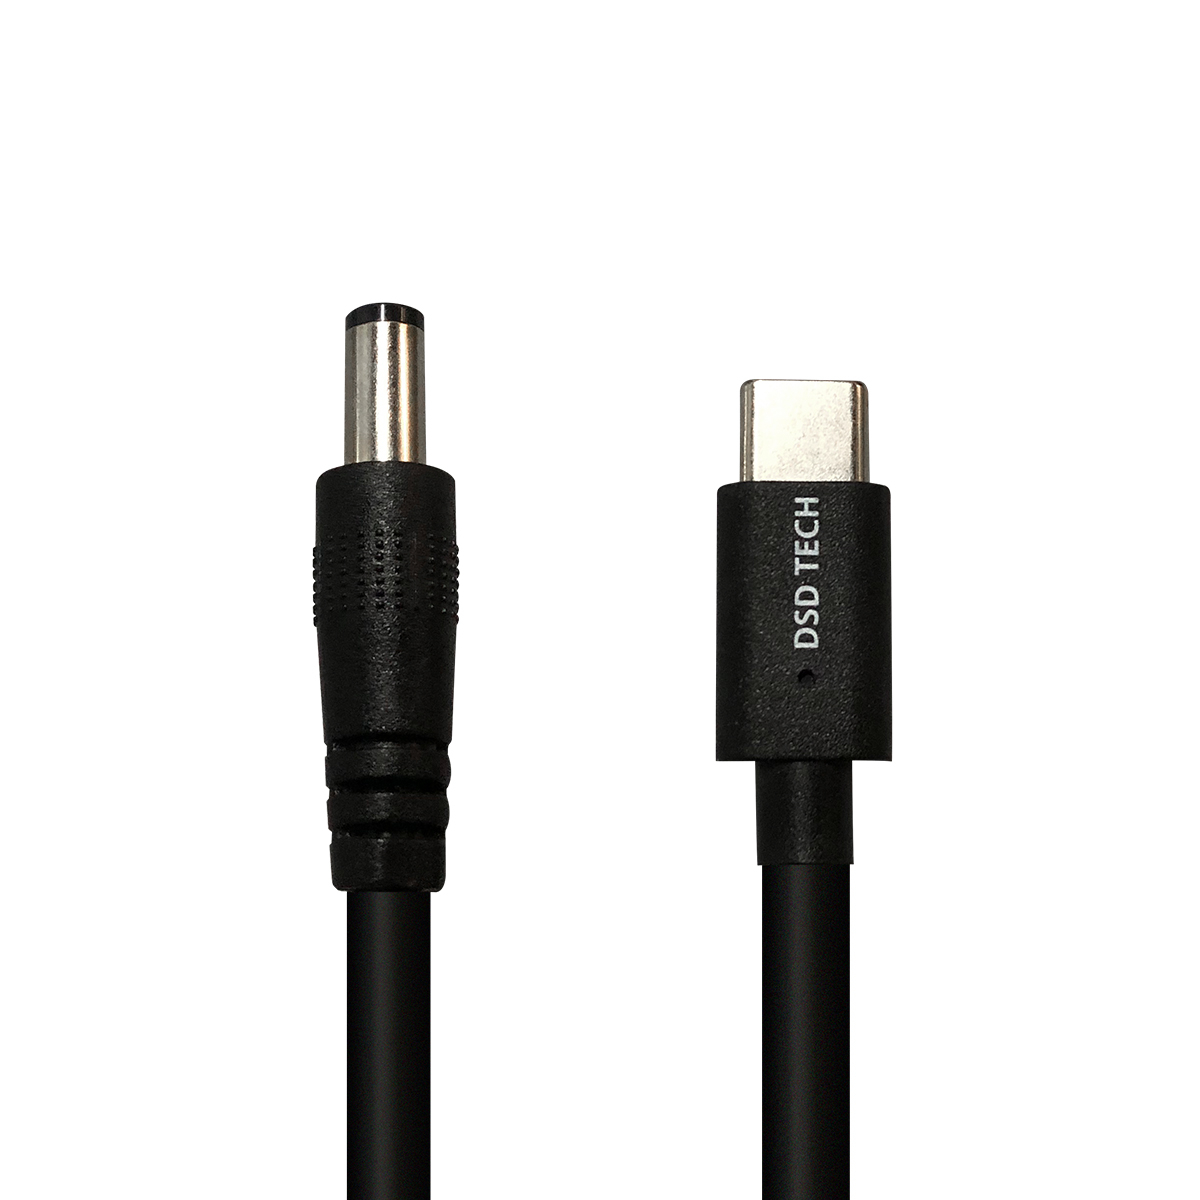 MagicConn SH-CP12A  USB Type C PD to DC Cable